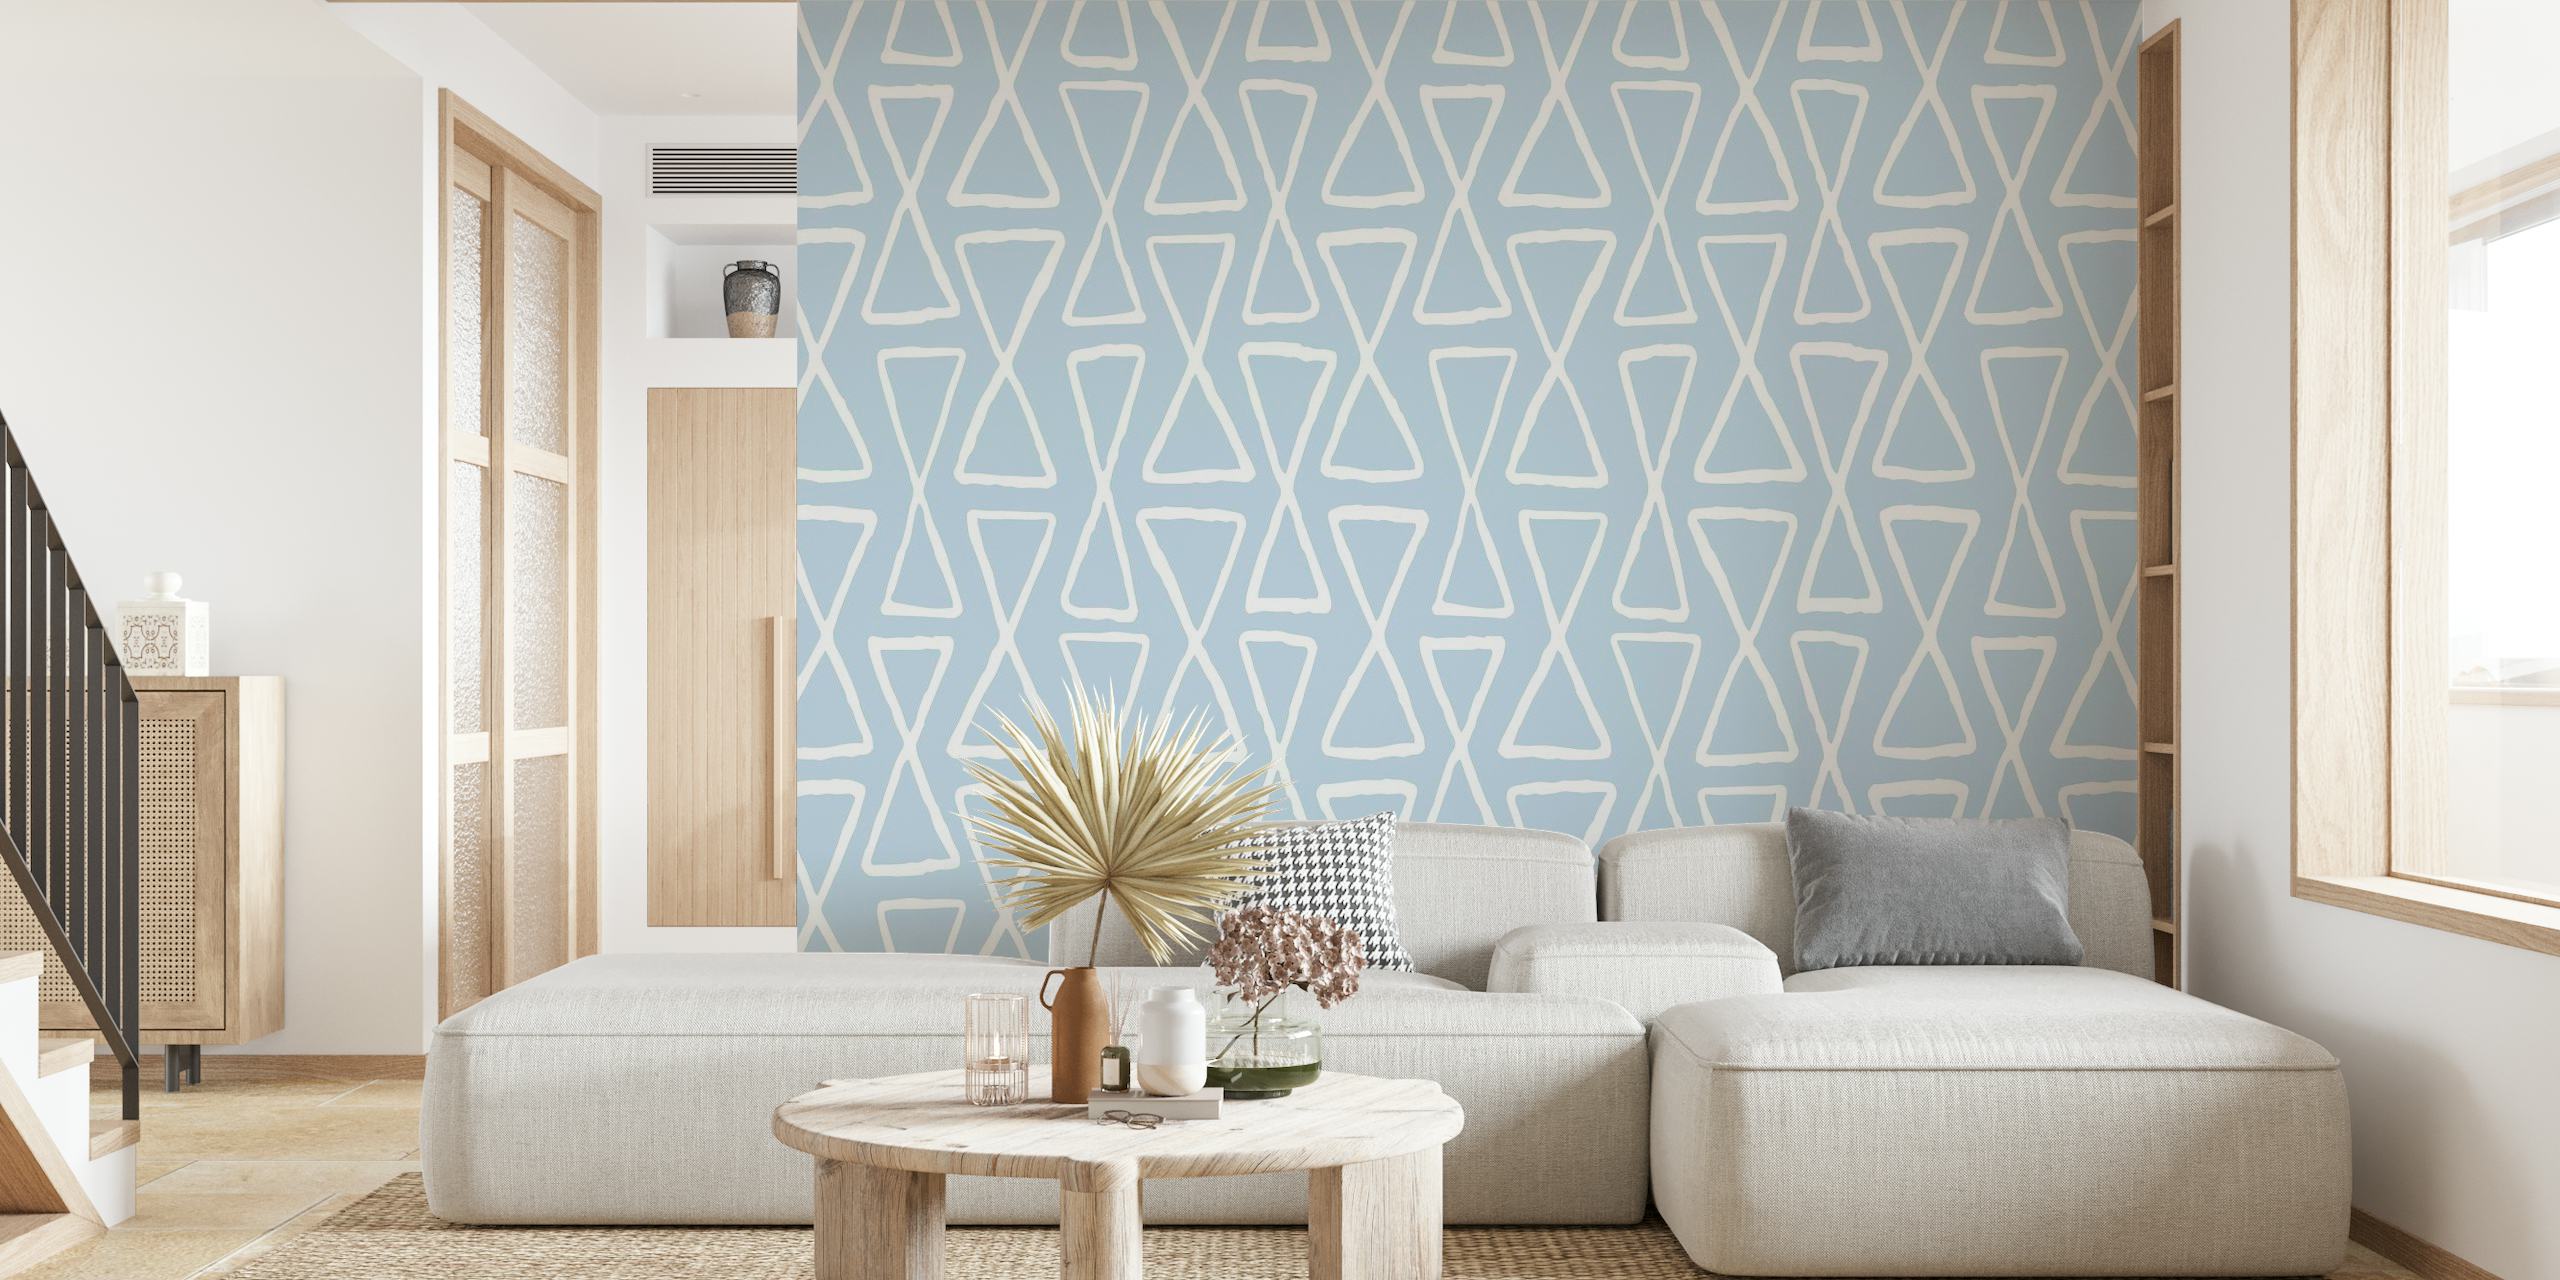 Hourglass white geometric pattern on a blue background for wall mural